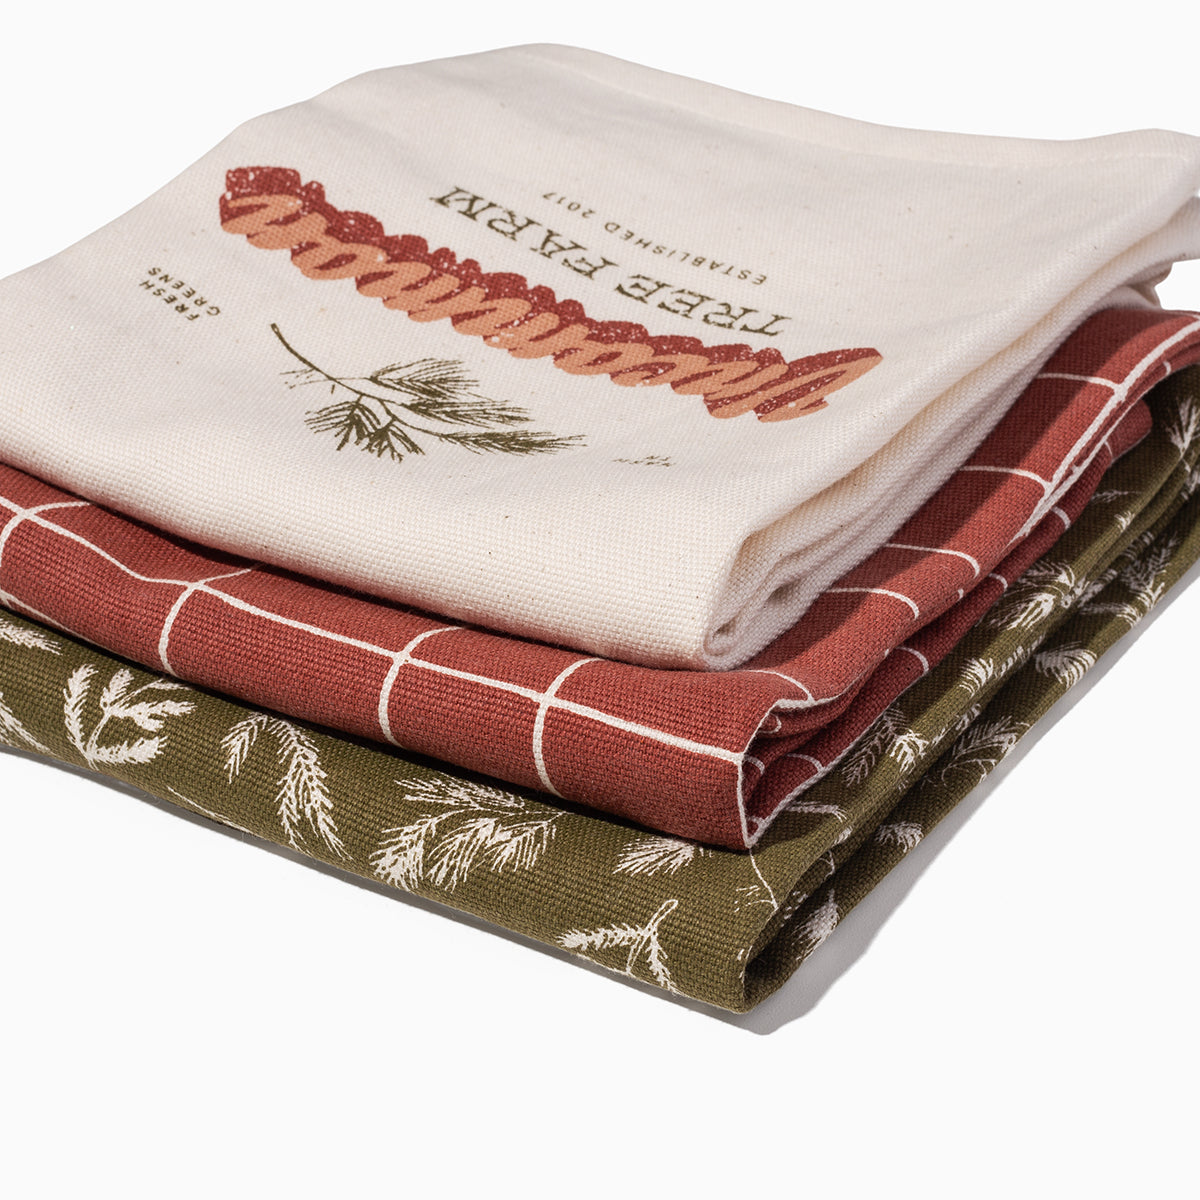 Refined Rustic Waffle Dishtowels - Set of 3 - Country Village Shoppe